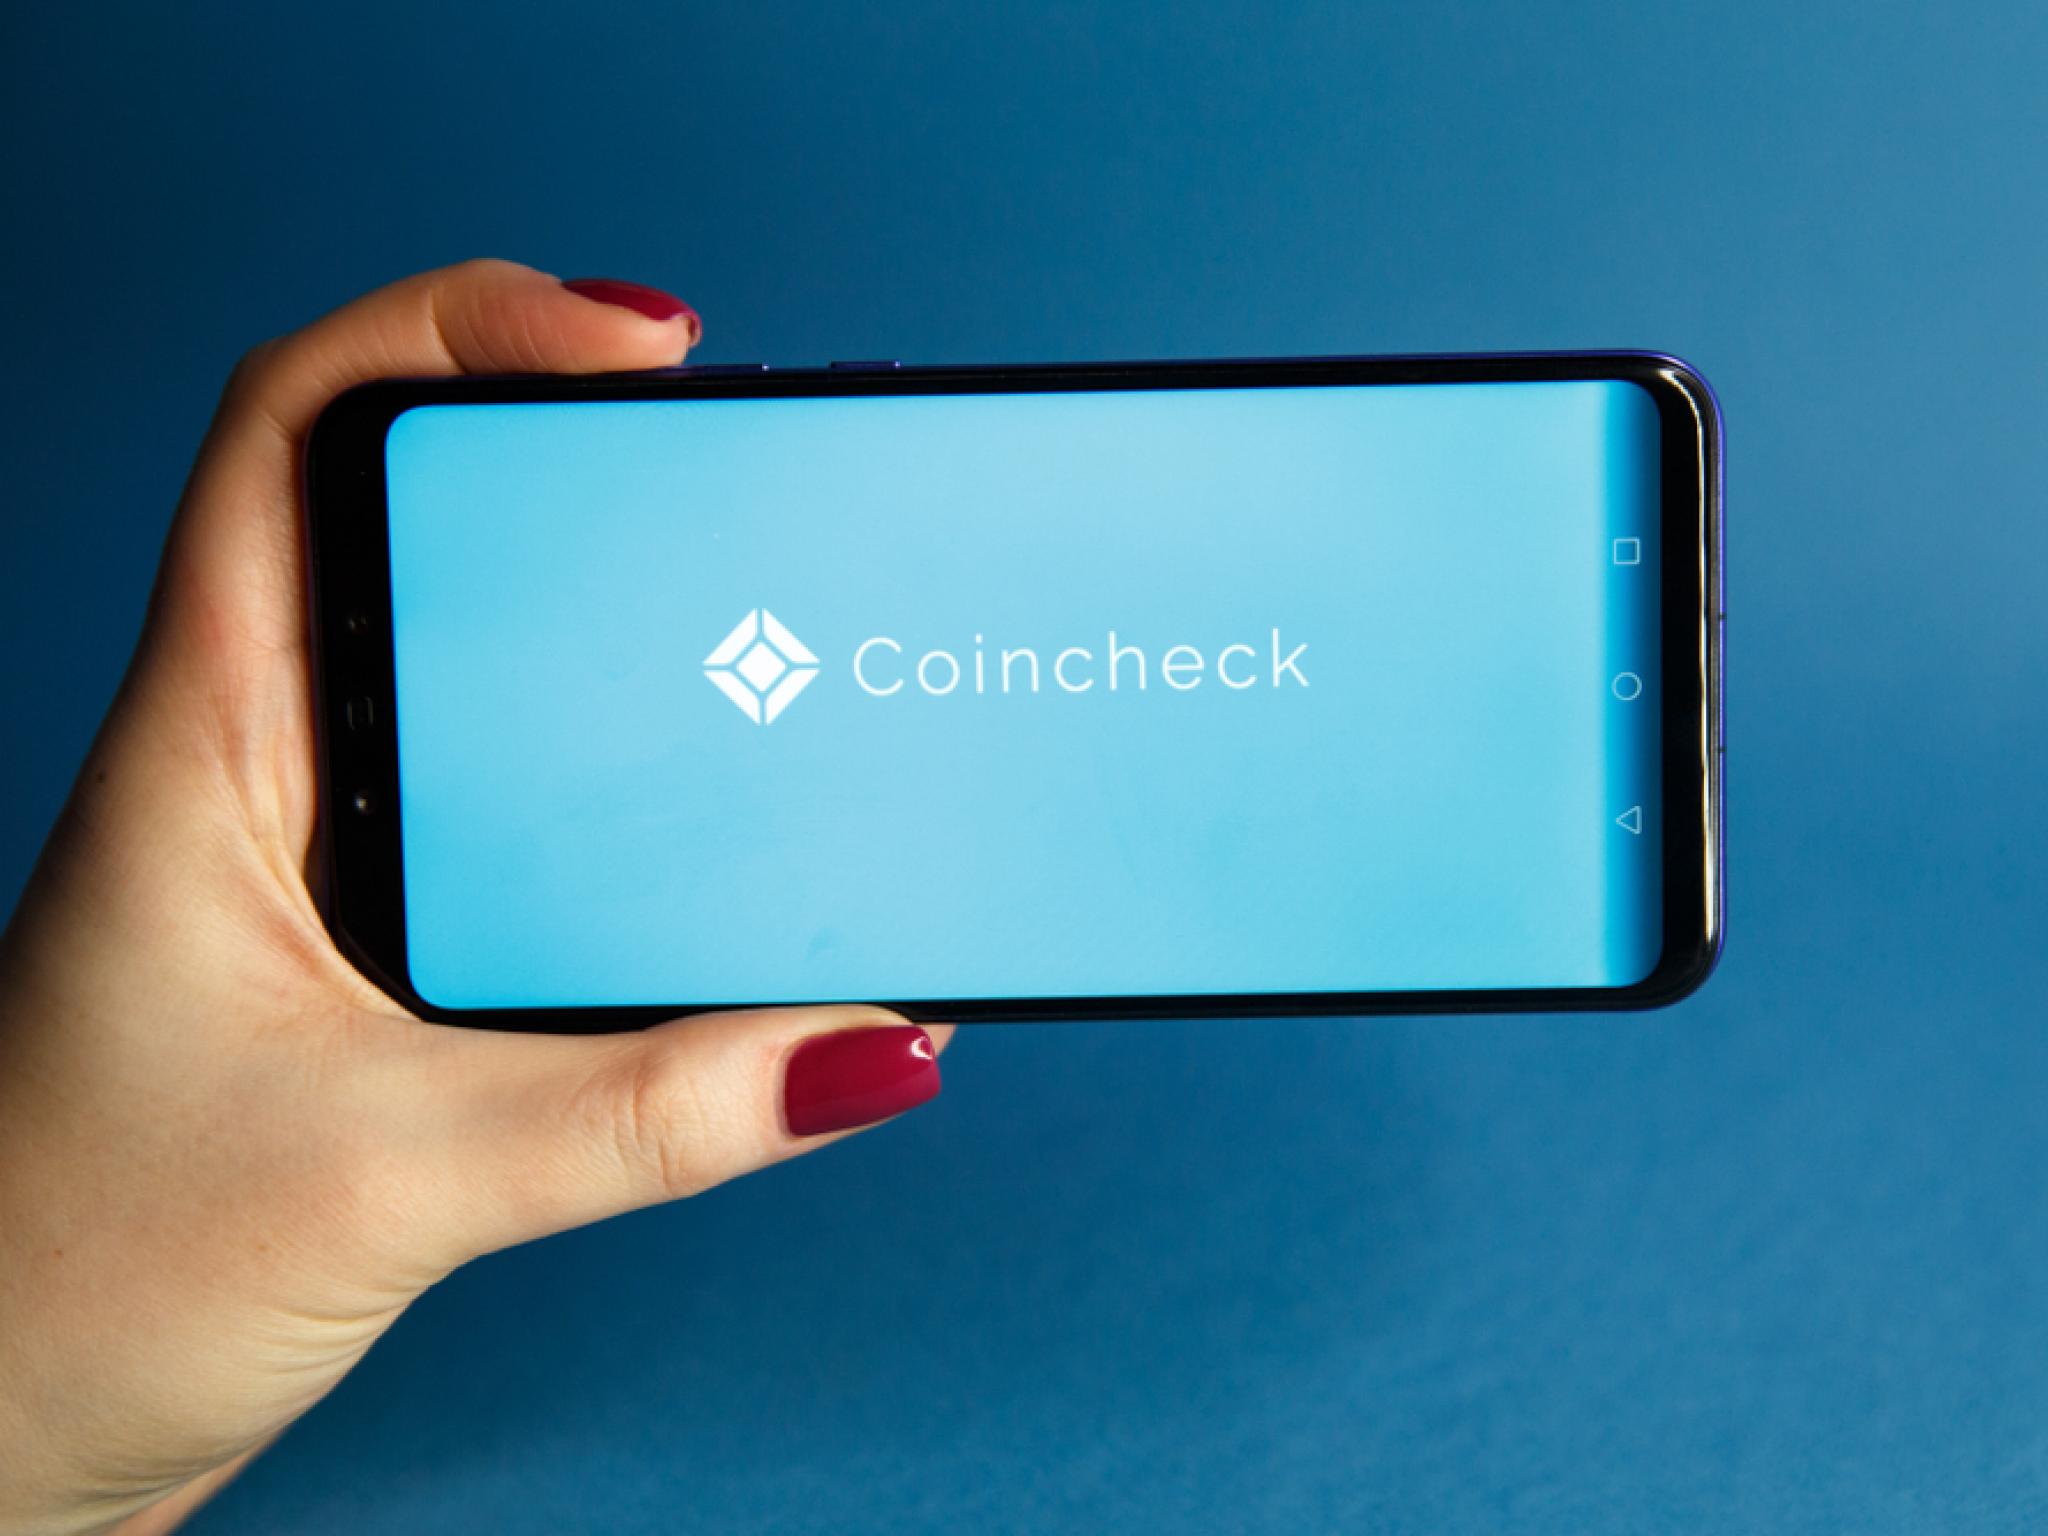  cryptocurrency-exchange-coincheck-to-list-on-nasdaq-by-merging-with-spac 